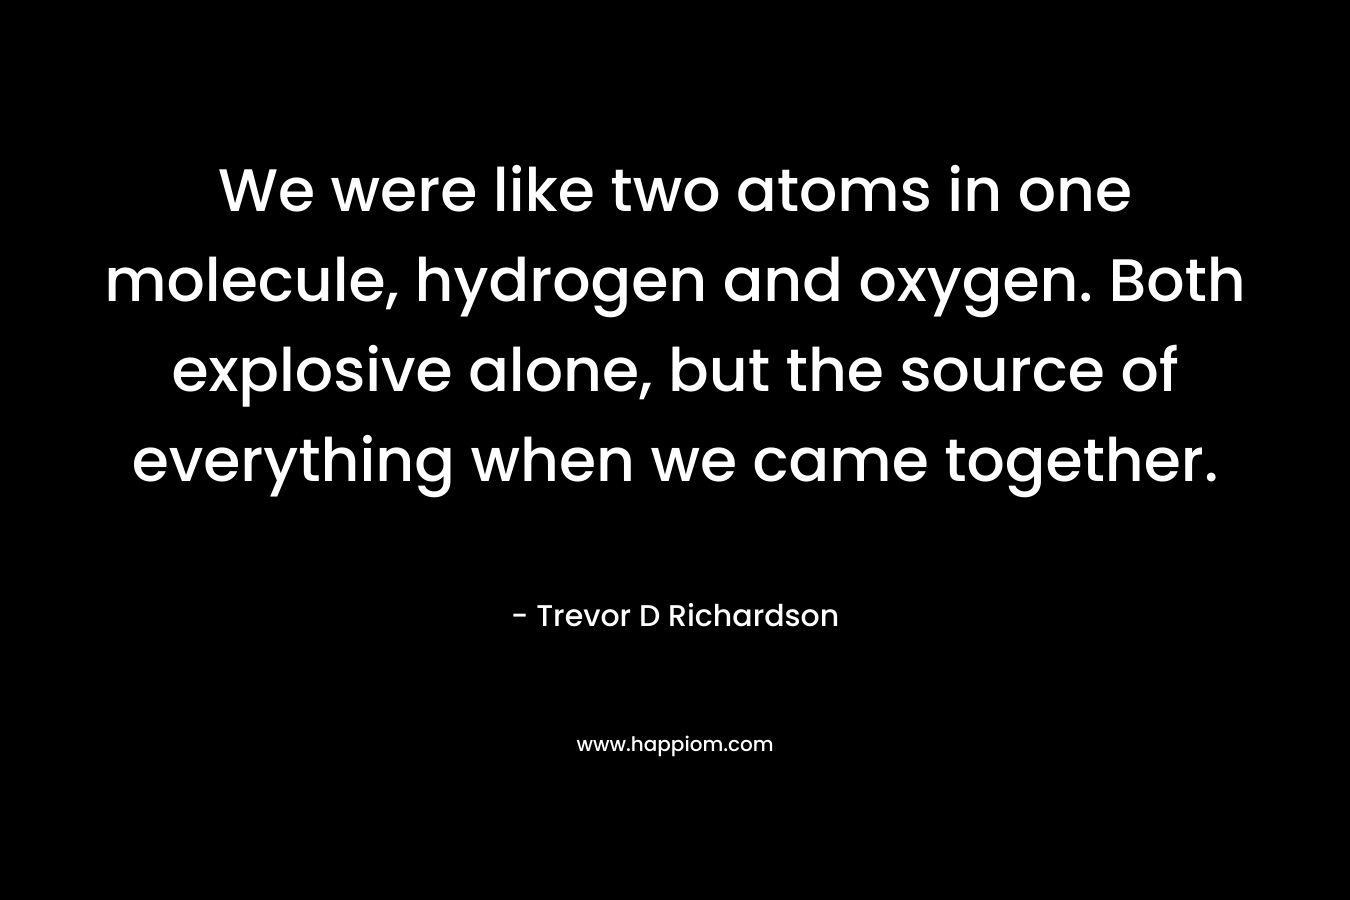 We were like two atoms in one molecule, hydrogen and oxygen. Both explosive alone, but the source of everything when we came together.